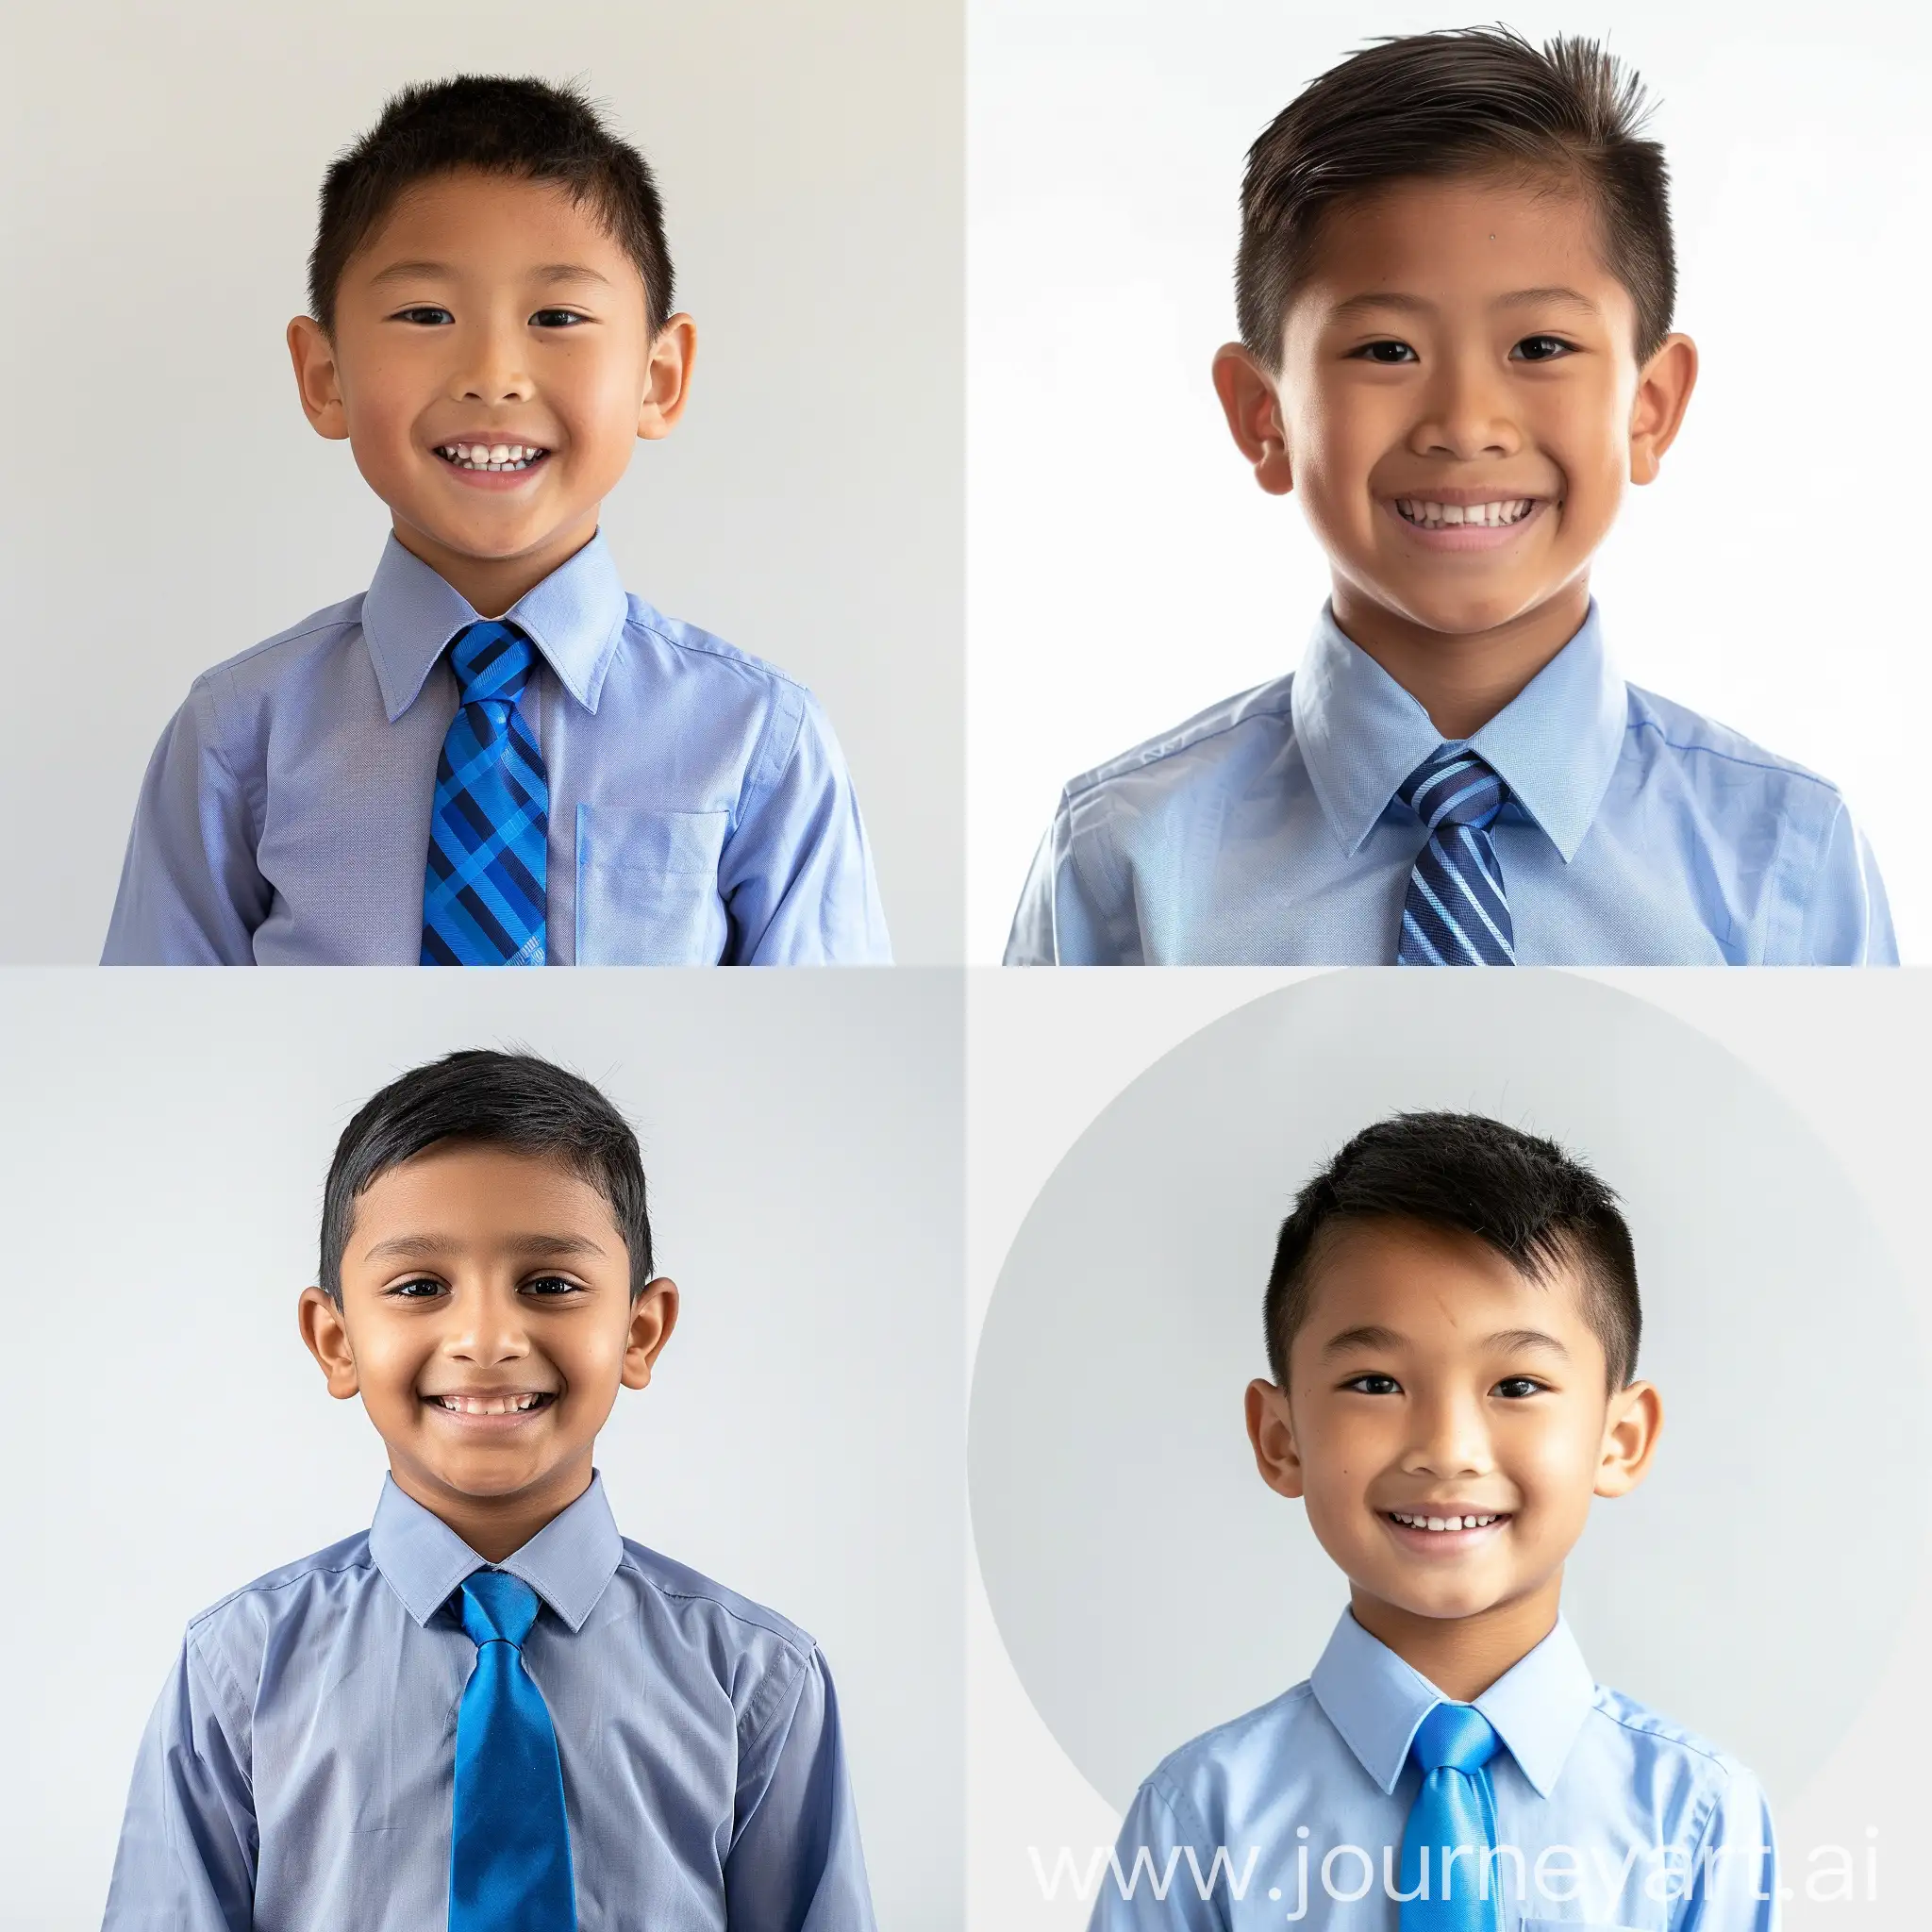 Smiling-Handsome-Boy-in-Shirt-and-Blue-Tie-Portrait